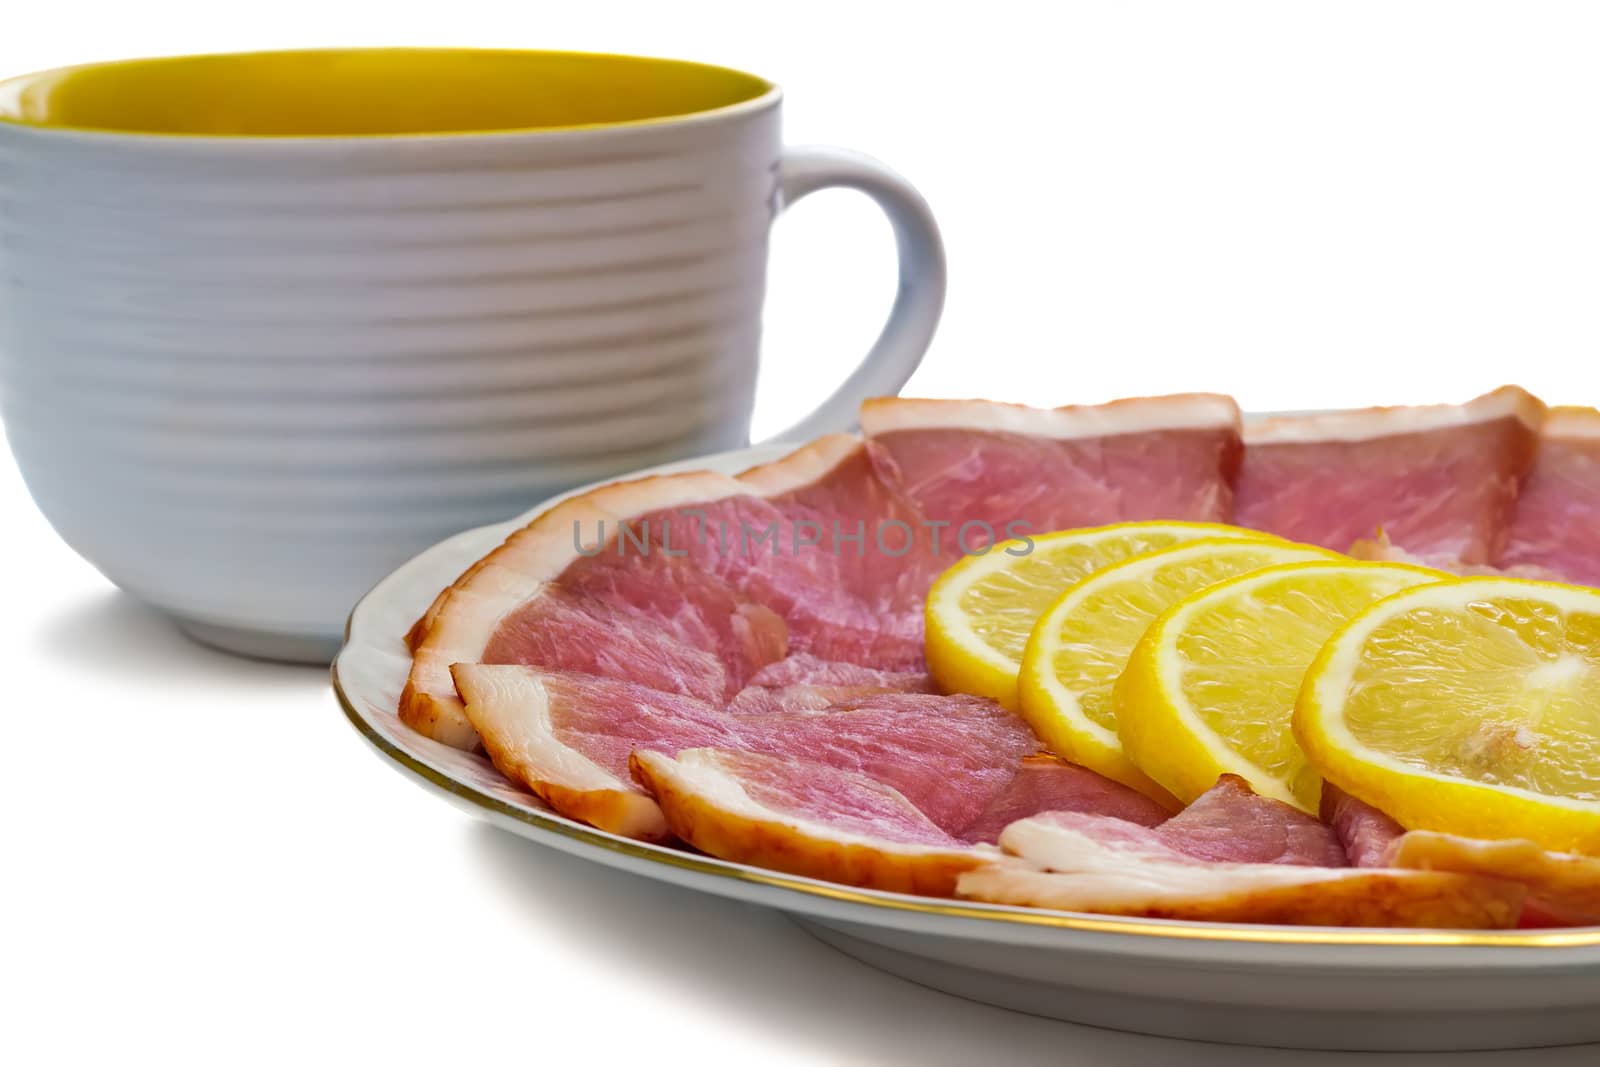 The dish with slices of ham and lemon on a white background. by georgina198